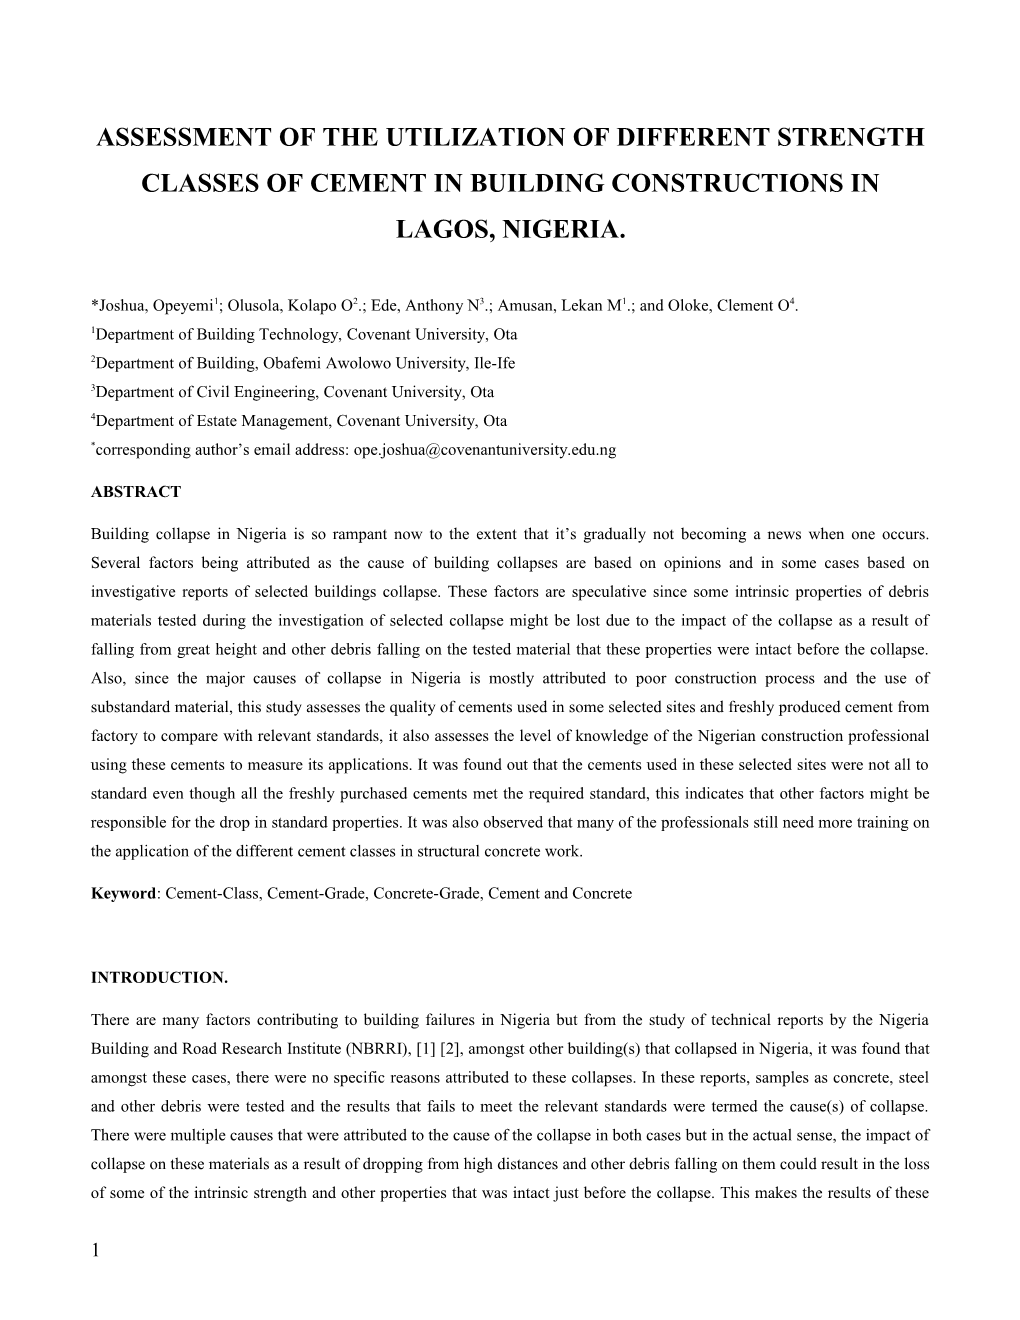 Assessment of the Utilization of Different Strength Classesof Cement in Buildingconstructions